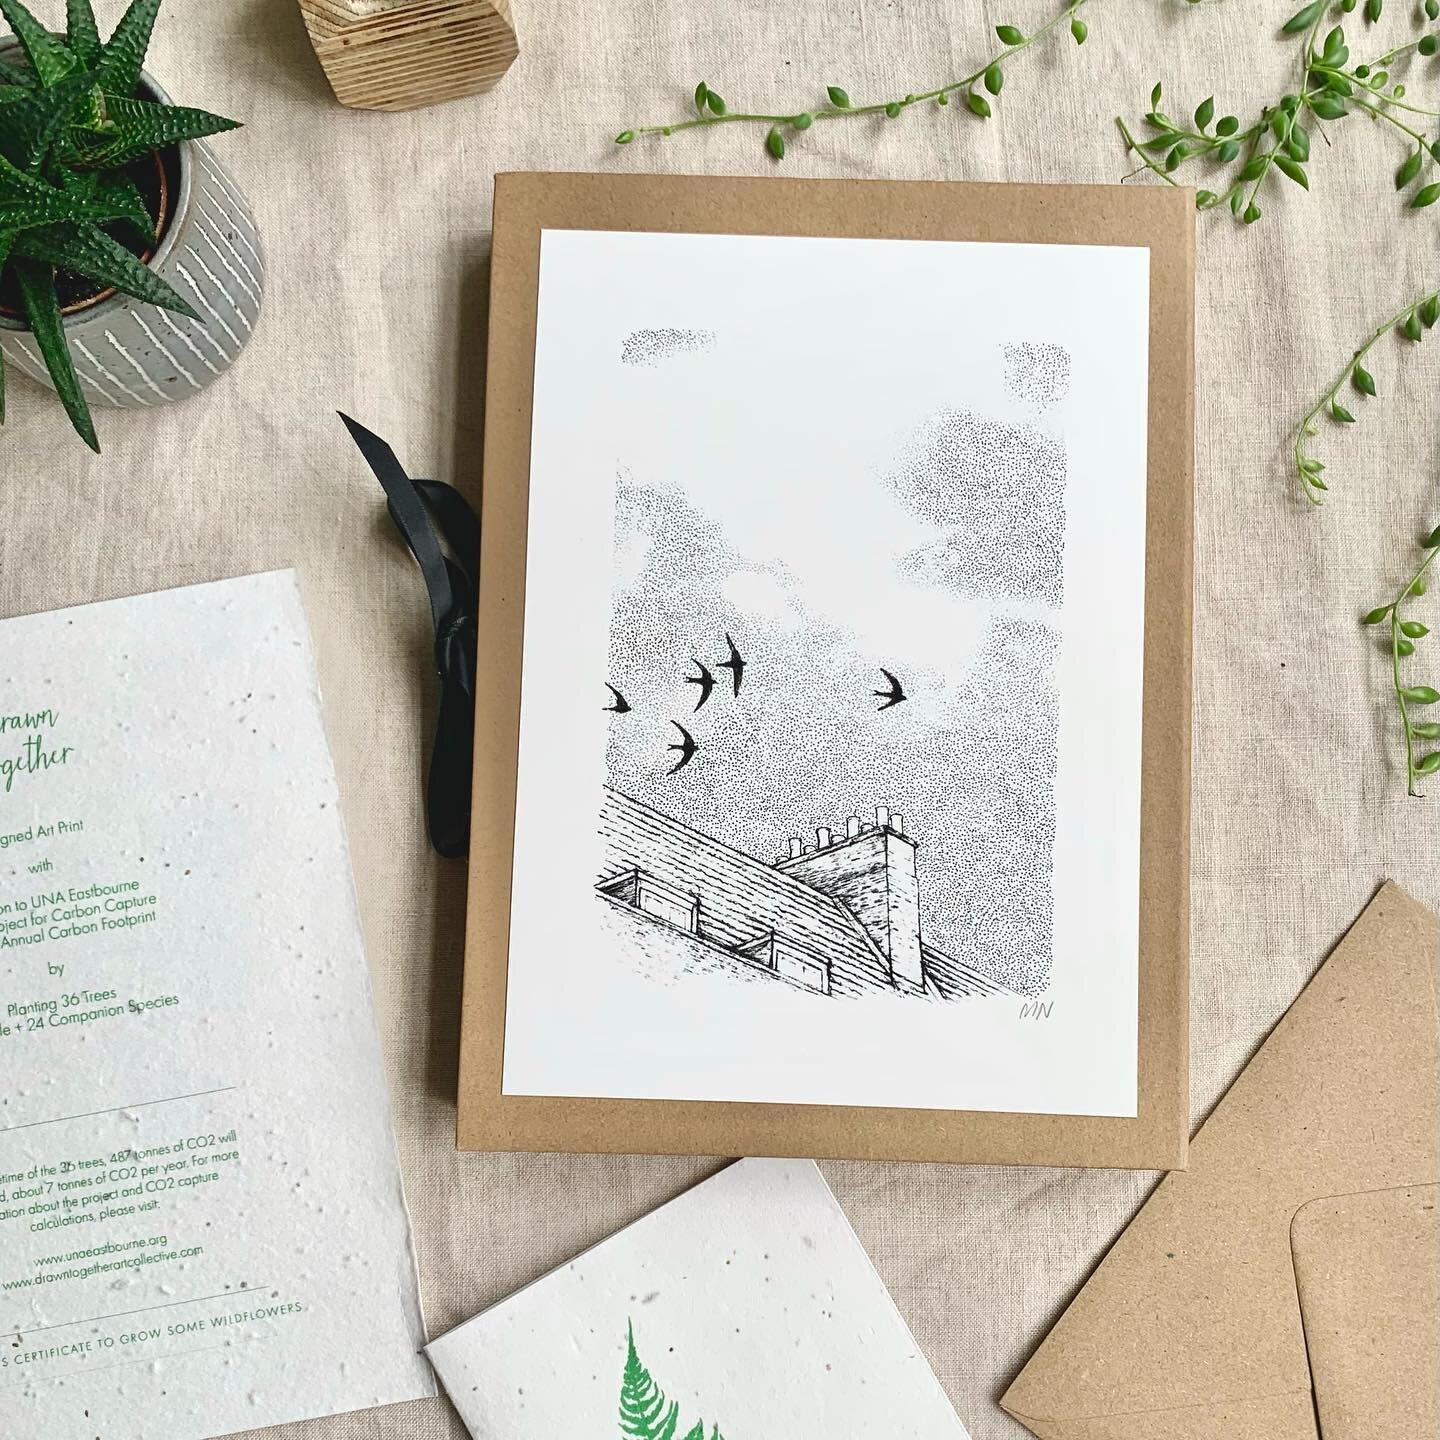 These two illustrations of mine are available in the new Carbon-Offset Art Gift Box by @drawntogetherart 
🍃
The eco-friendly gift set includes an A5 gicl&eacute;e art print AND a donation to offset the gift recipient&rsquo;s annual carbon footprint 